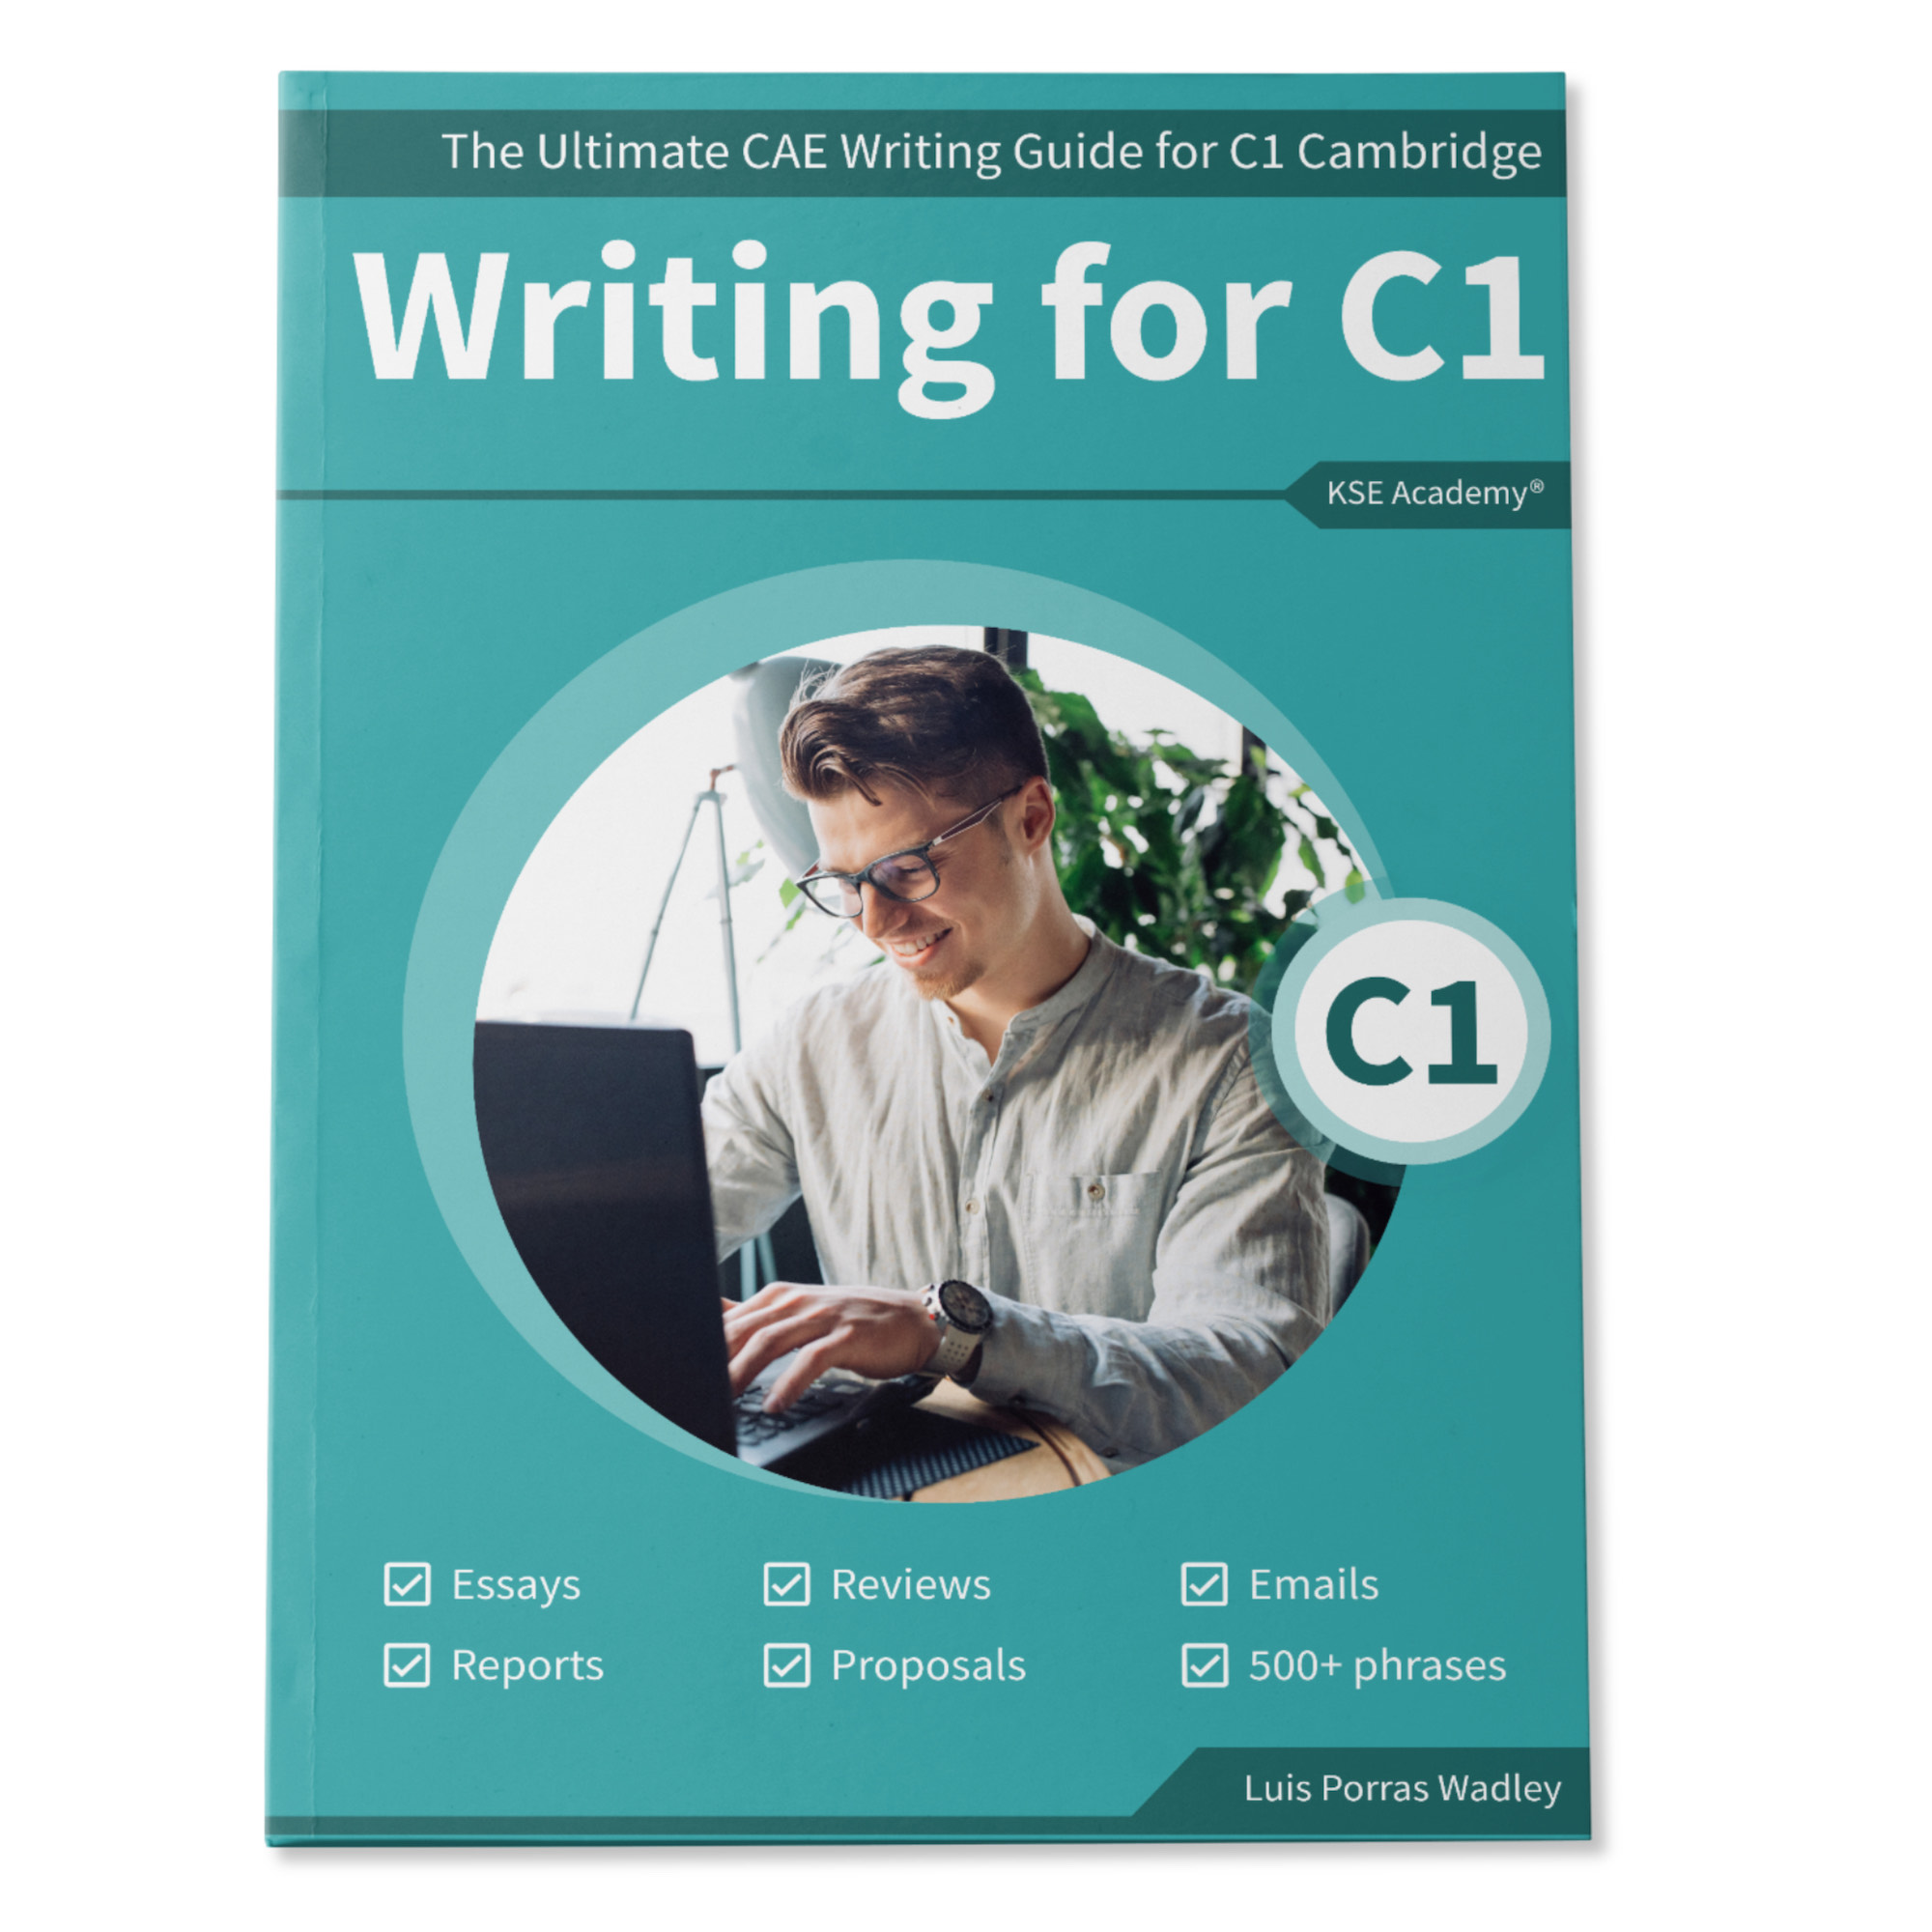 Writing C1: The Ultimate CAE Writing Guide for C1 Advanced